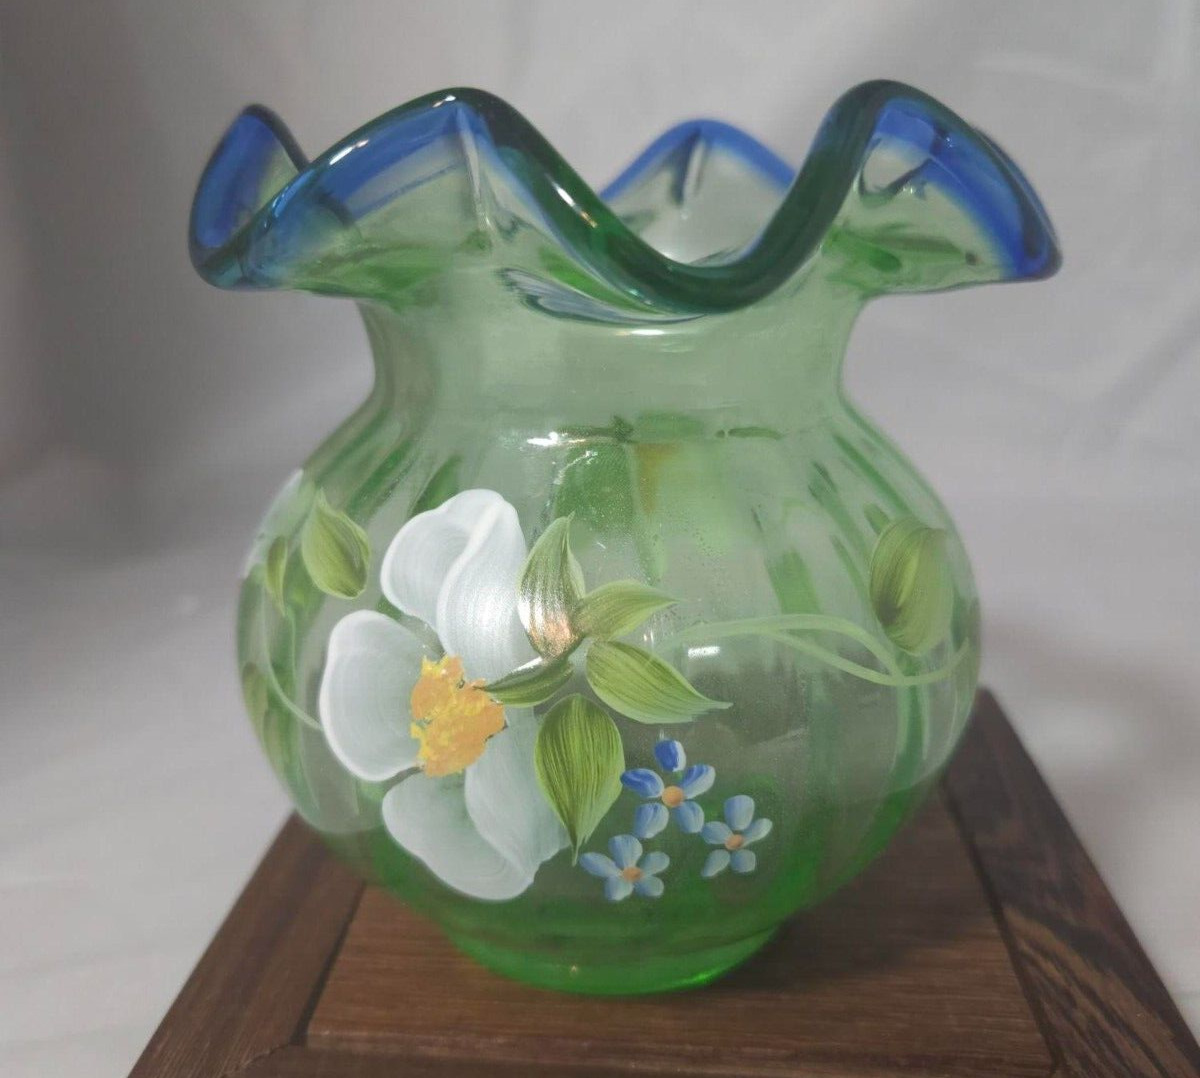 Vintage Fenton Light Green Rose Bowl with Blue Scalloped Edge - signed